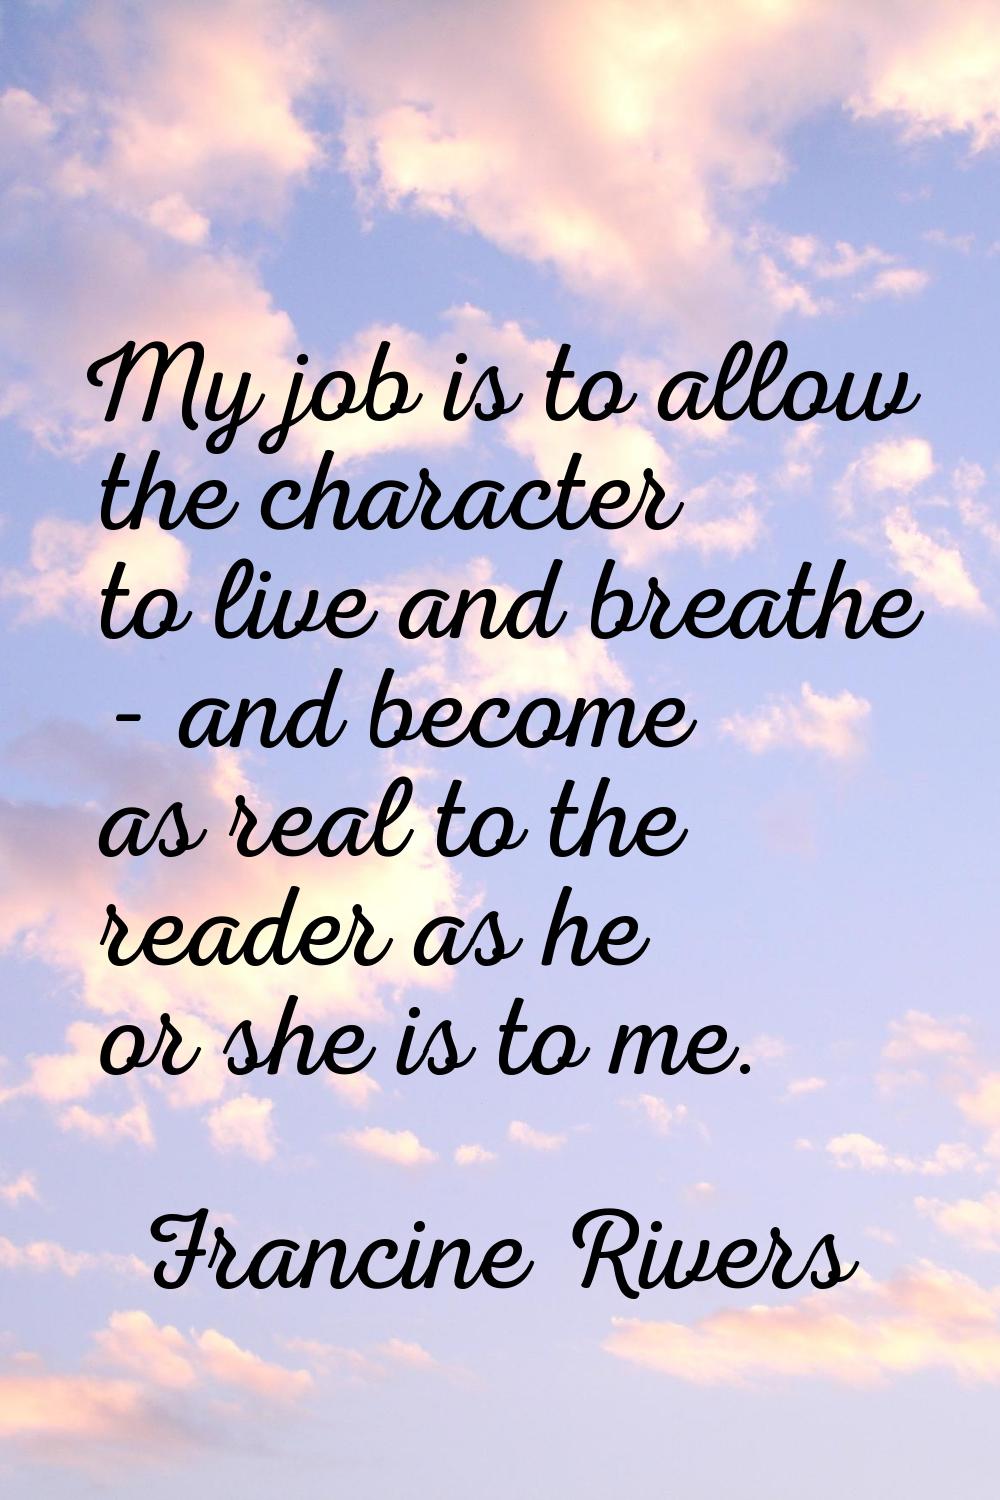 My job is to allow the character to live and breathe - and become as real to the reader as he or sh